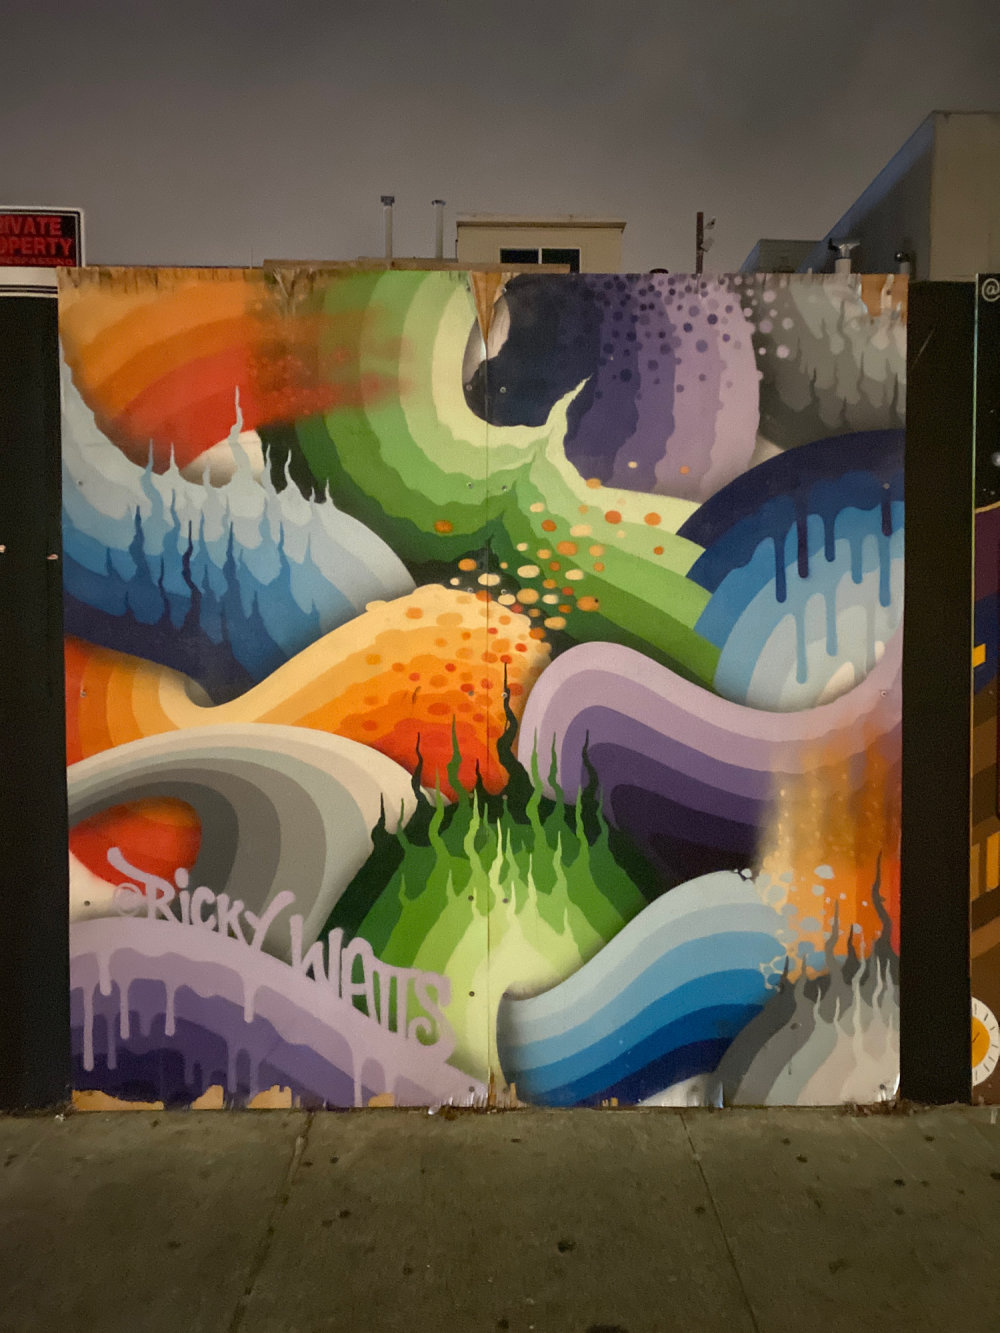 mural in San Francisco by artist Ricky Watts.